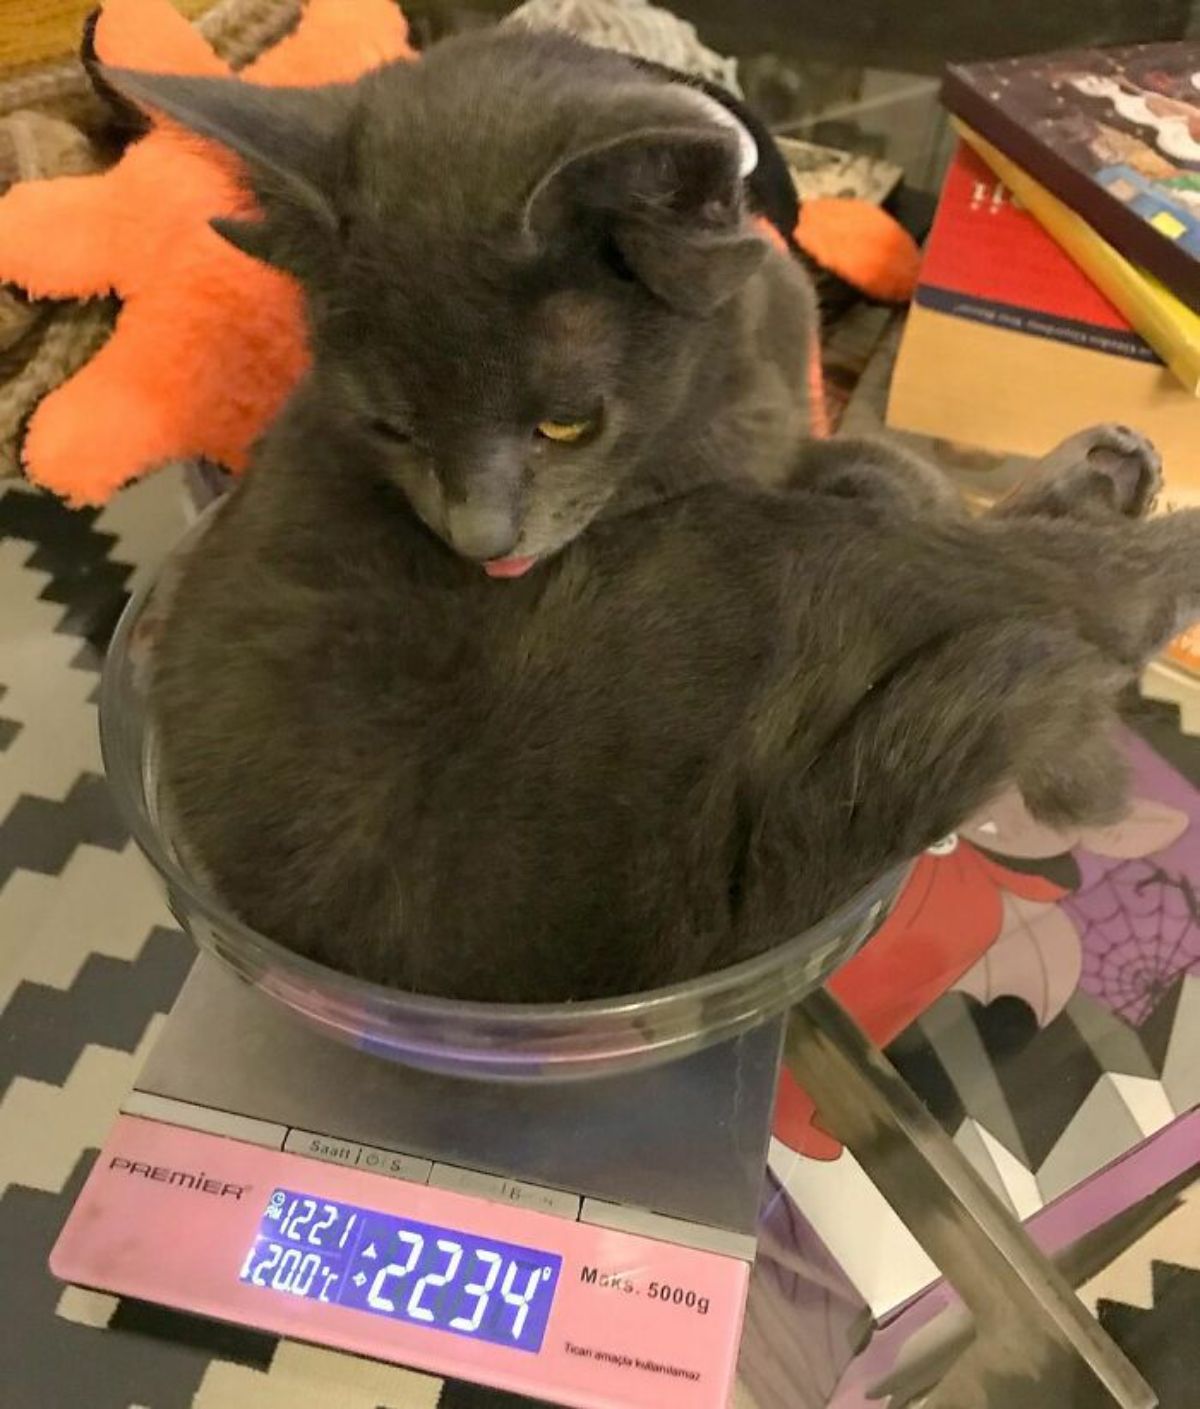 grey kitten with four ears getting weighed and the tongue sticking out slightly and the scale showing 2234 grams